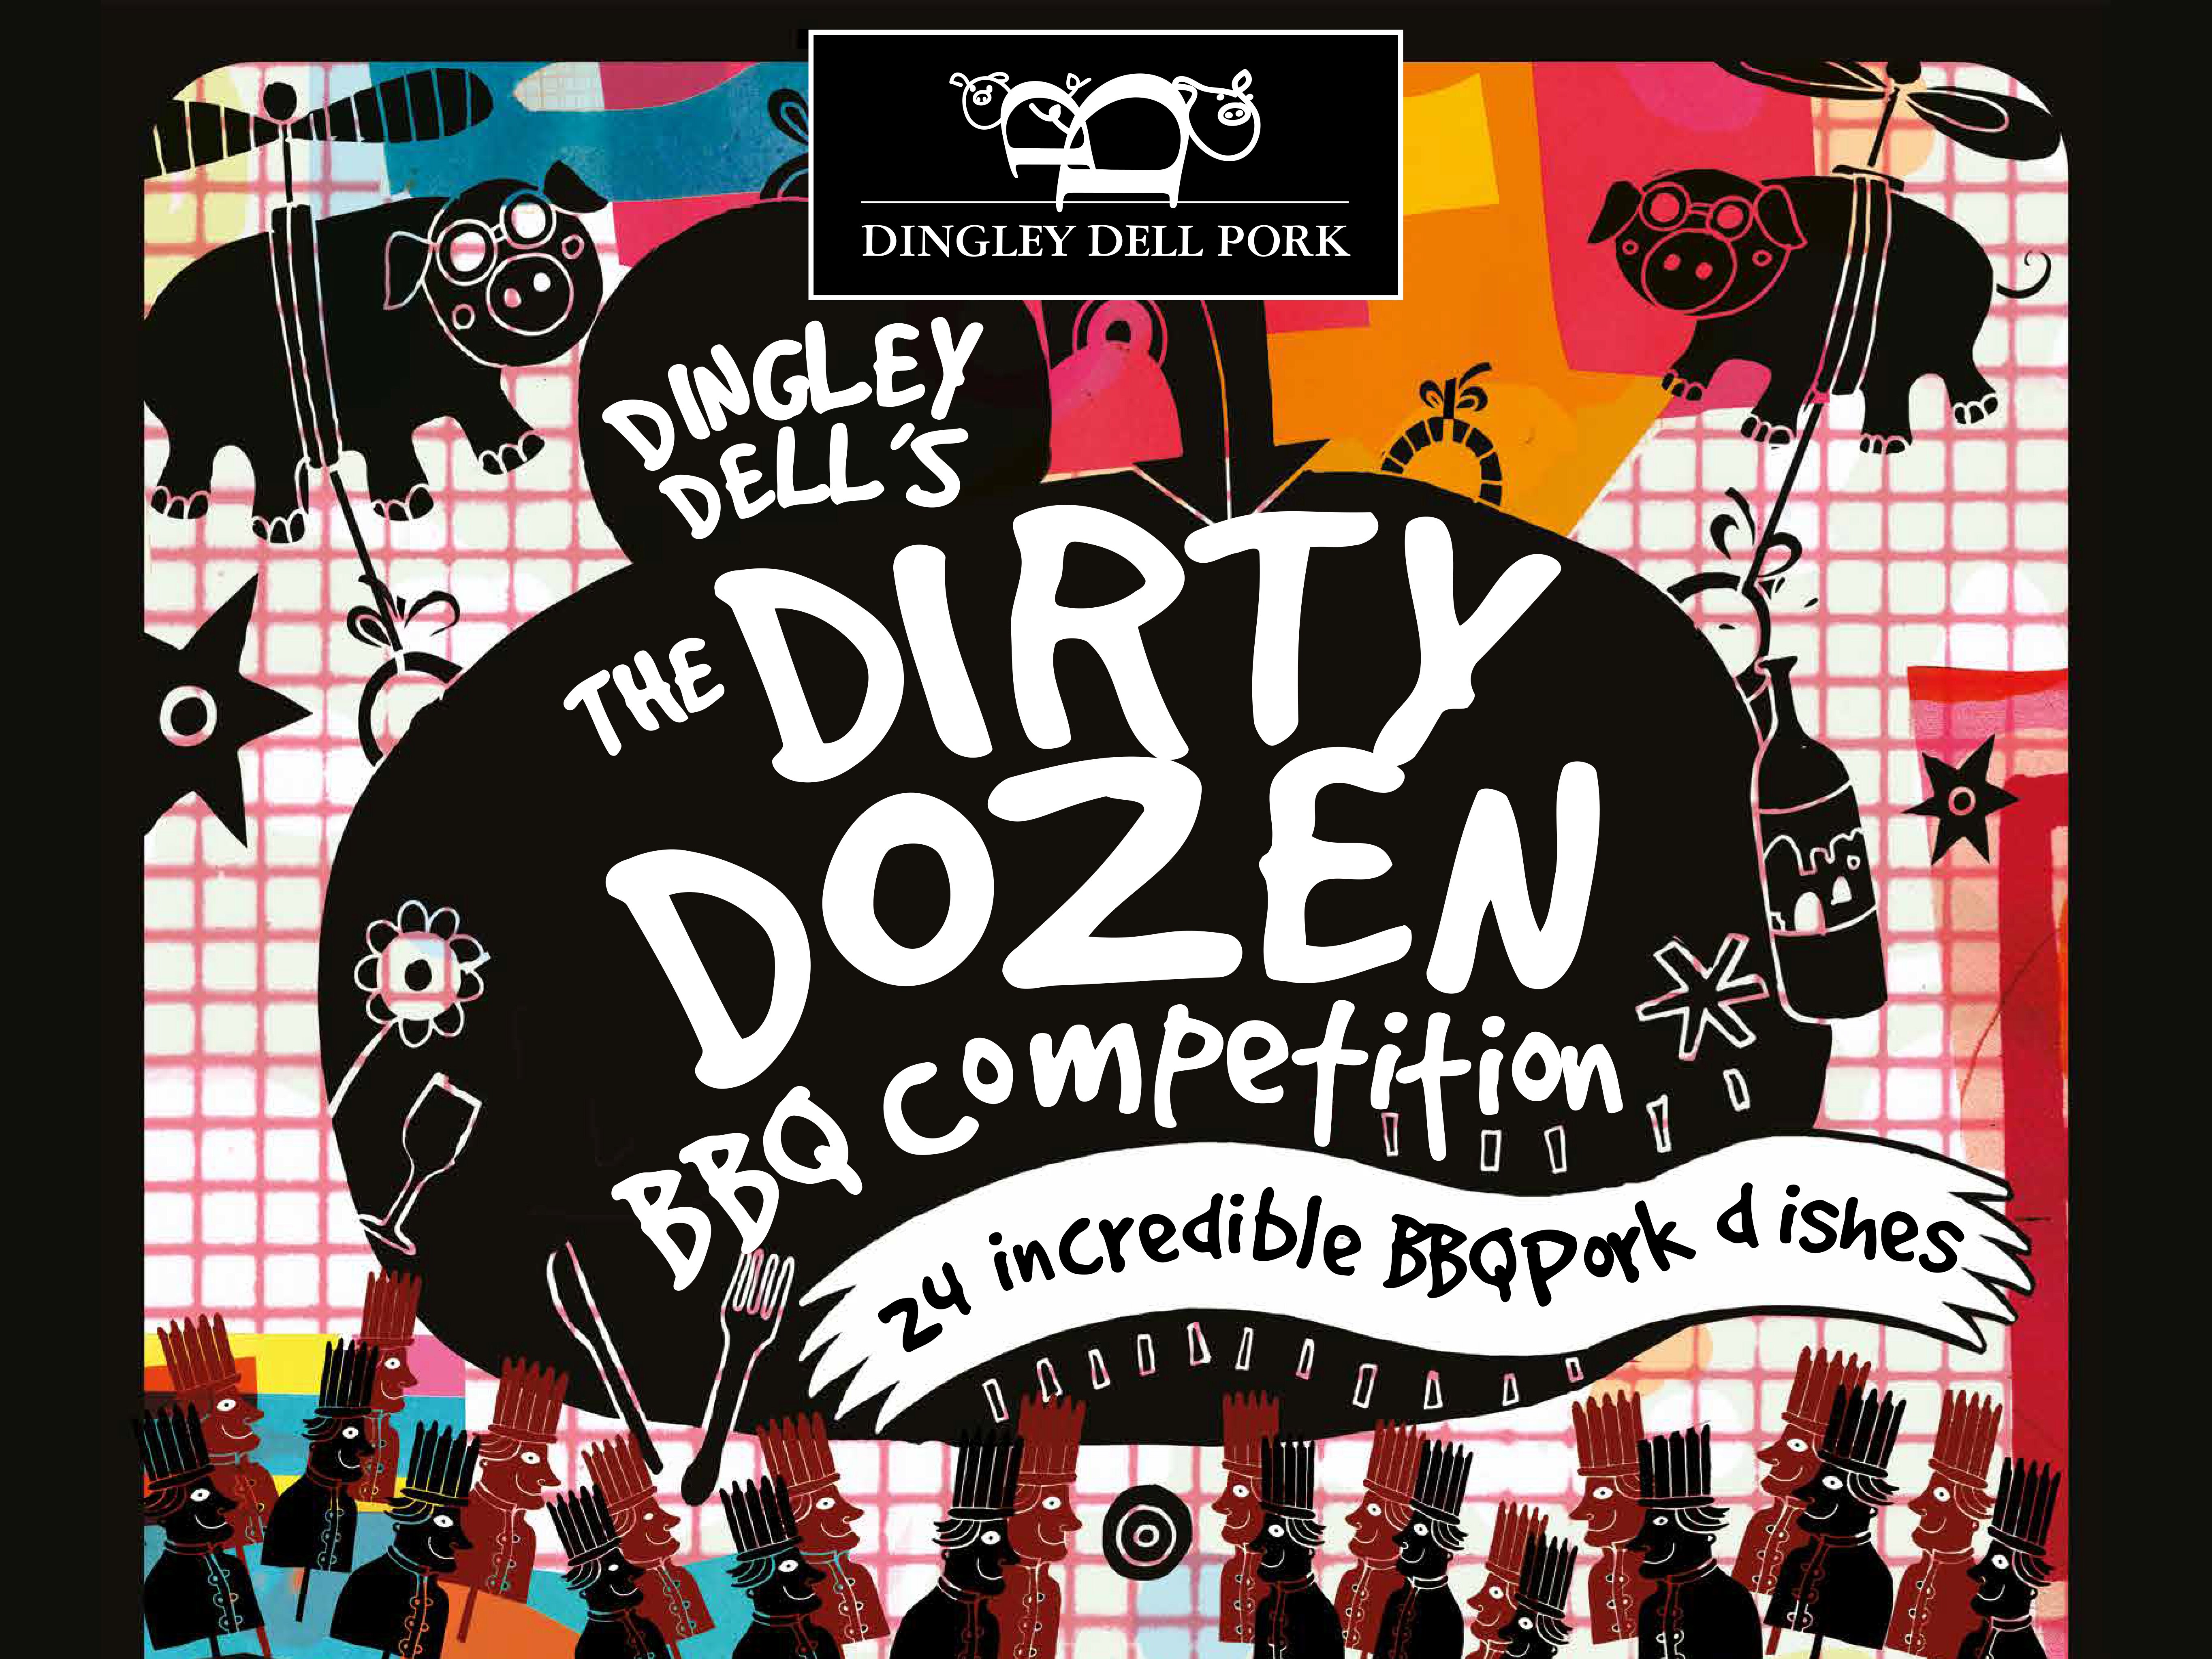 Signature Brewery to host the Dirty Dozen barbecue competition